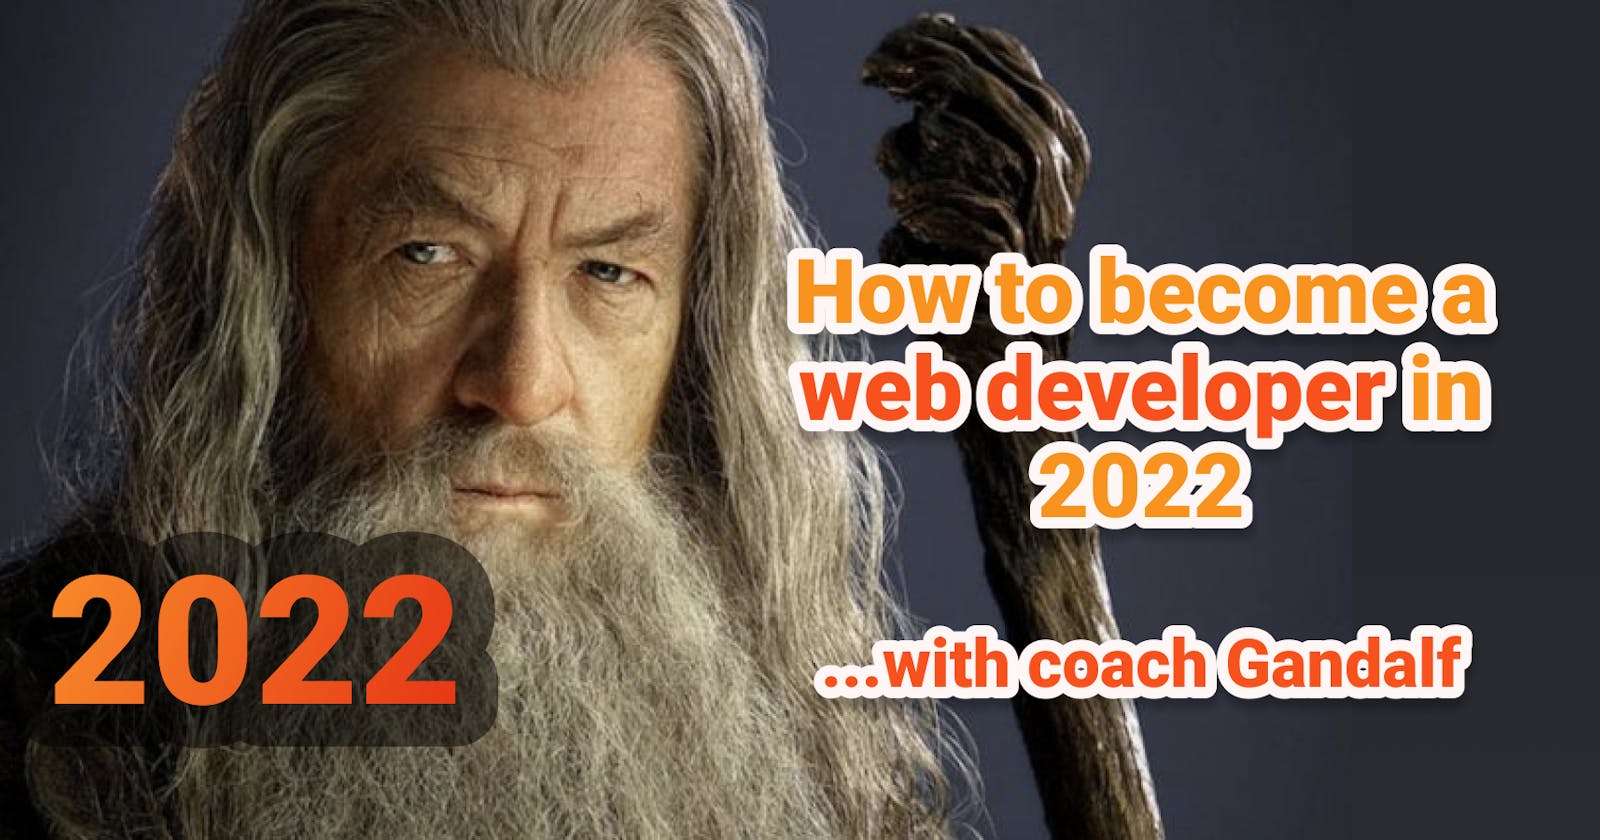 How to become a web developer in 2022, with coach Gandalf